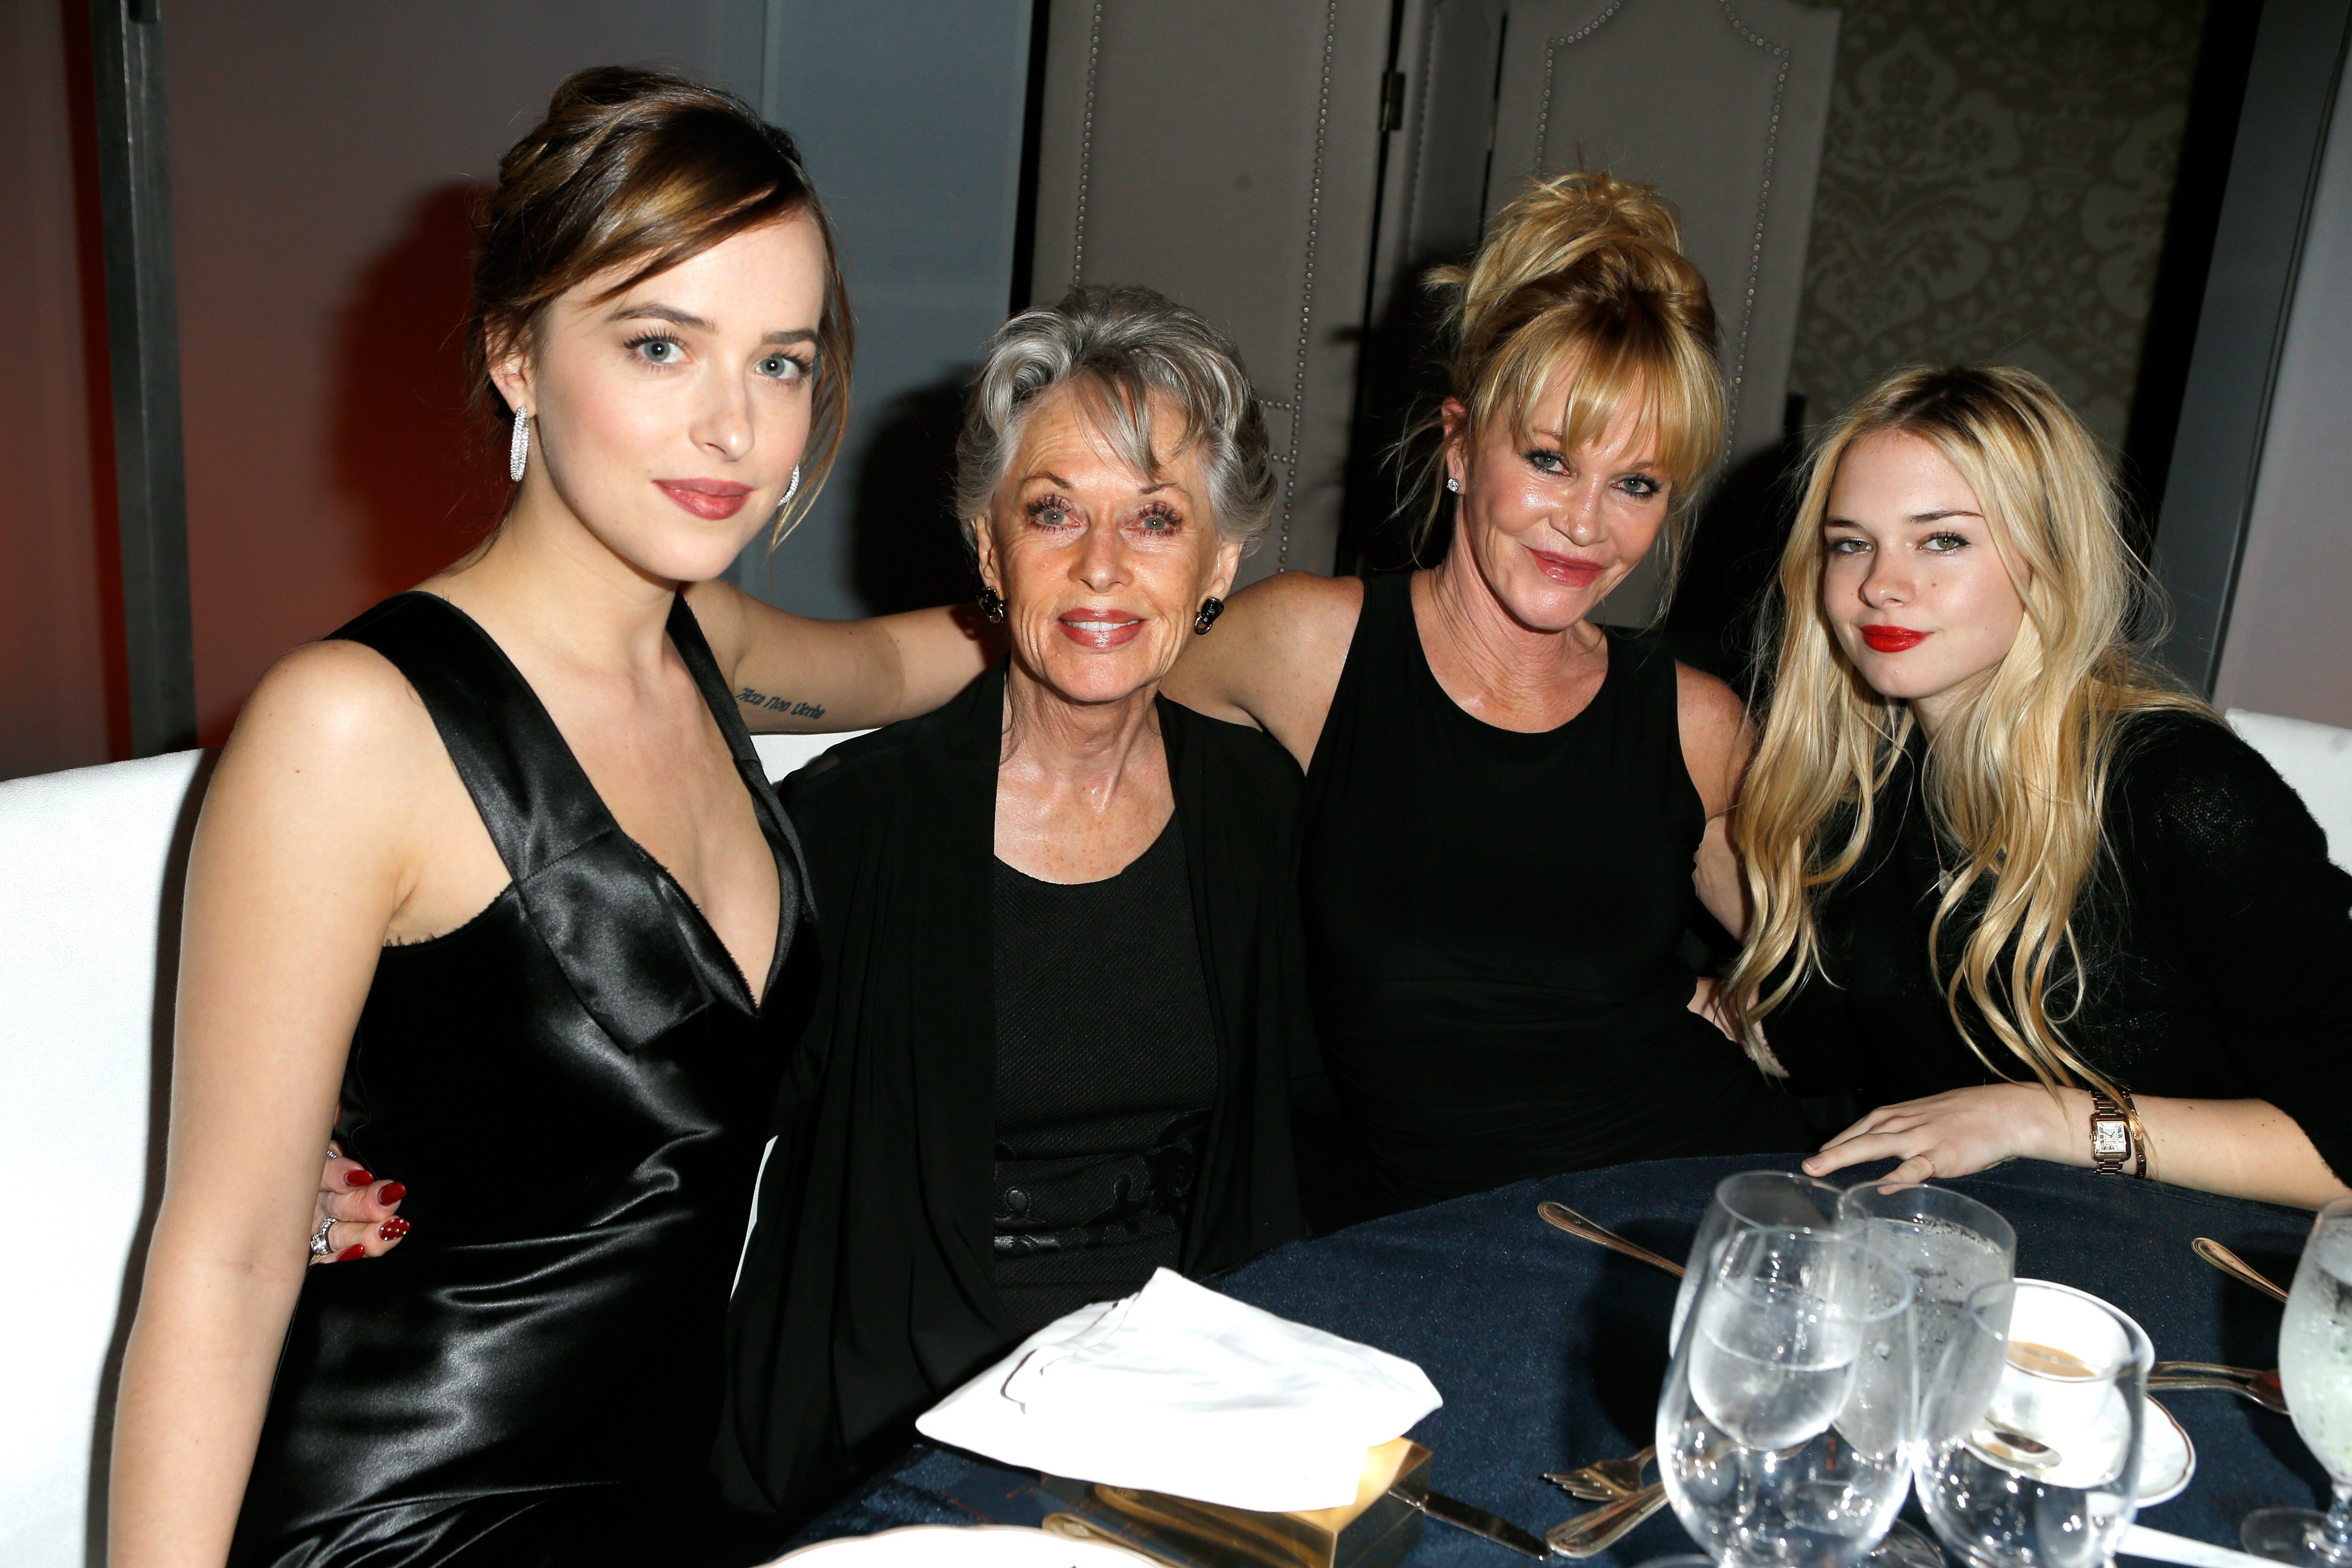 Dakota Johnson, Tippi Hedren, Melanie Griffith and Stella Banderas attend the 22nd Annual ELLE Women in Hollywood Awards presented by Calvin Klein Collection, L’Oréal Paris, and David Yurman at the Four Seasons Los Angeles at Beverly Hills on October 19, 2015 in Beverly Hills, California | Source: Getty Images 